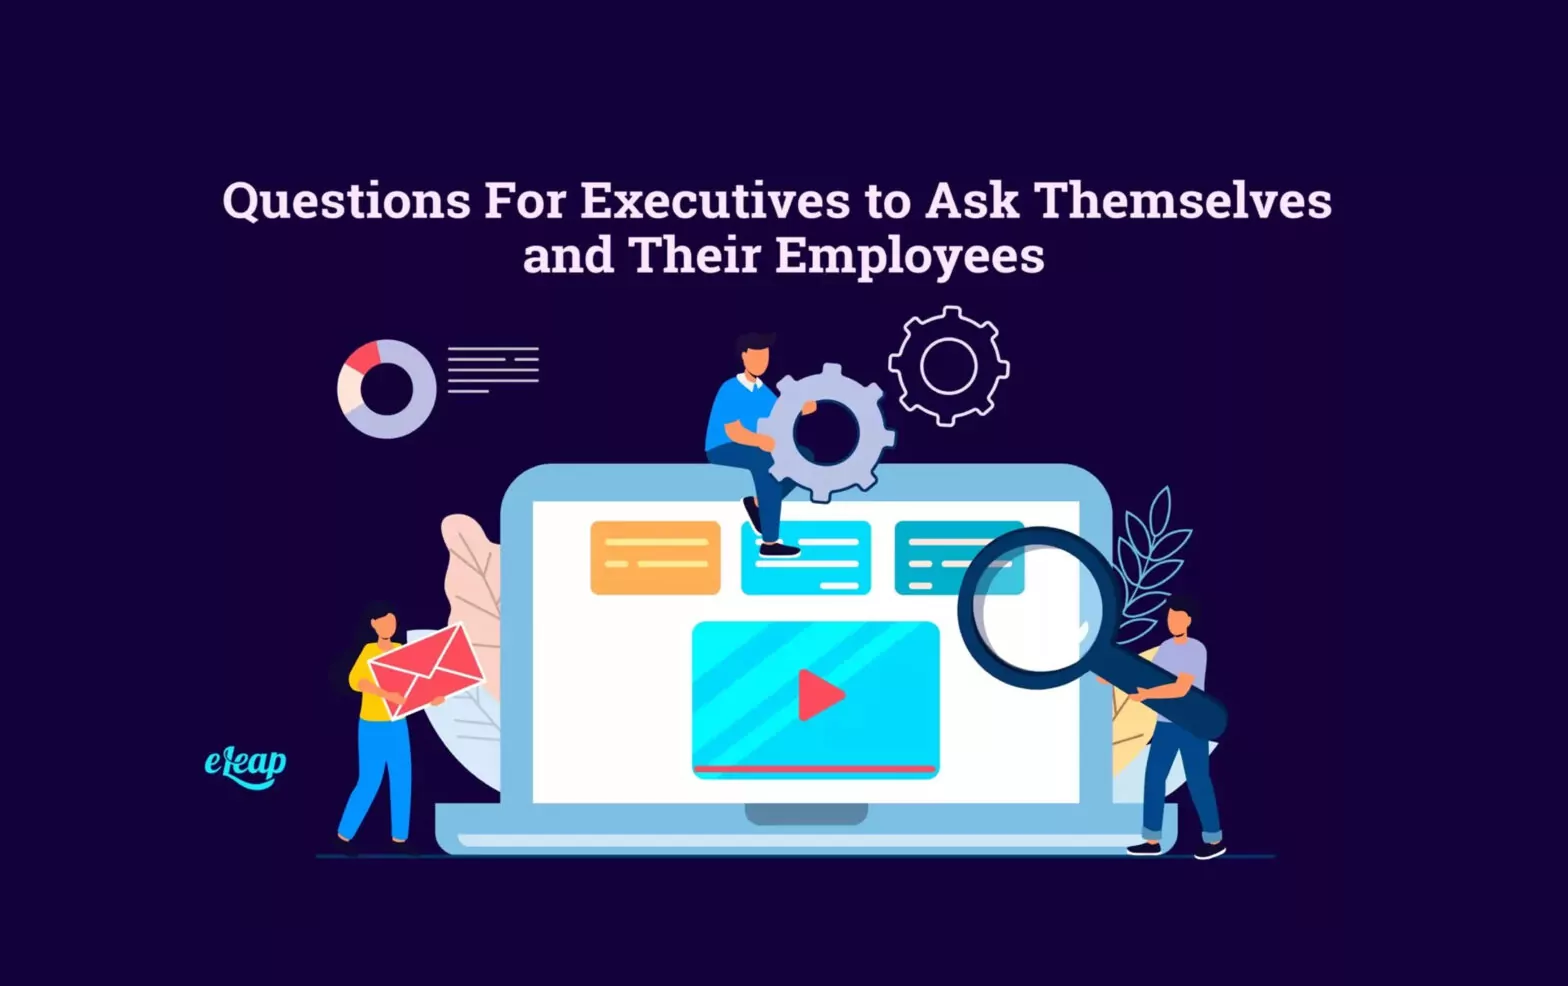 Questions For Executives to Ask Themselves and Their Employees